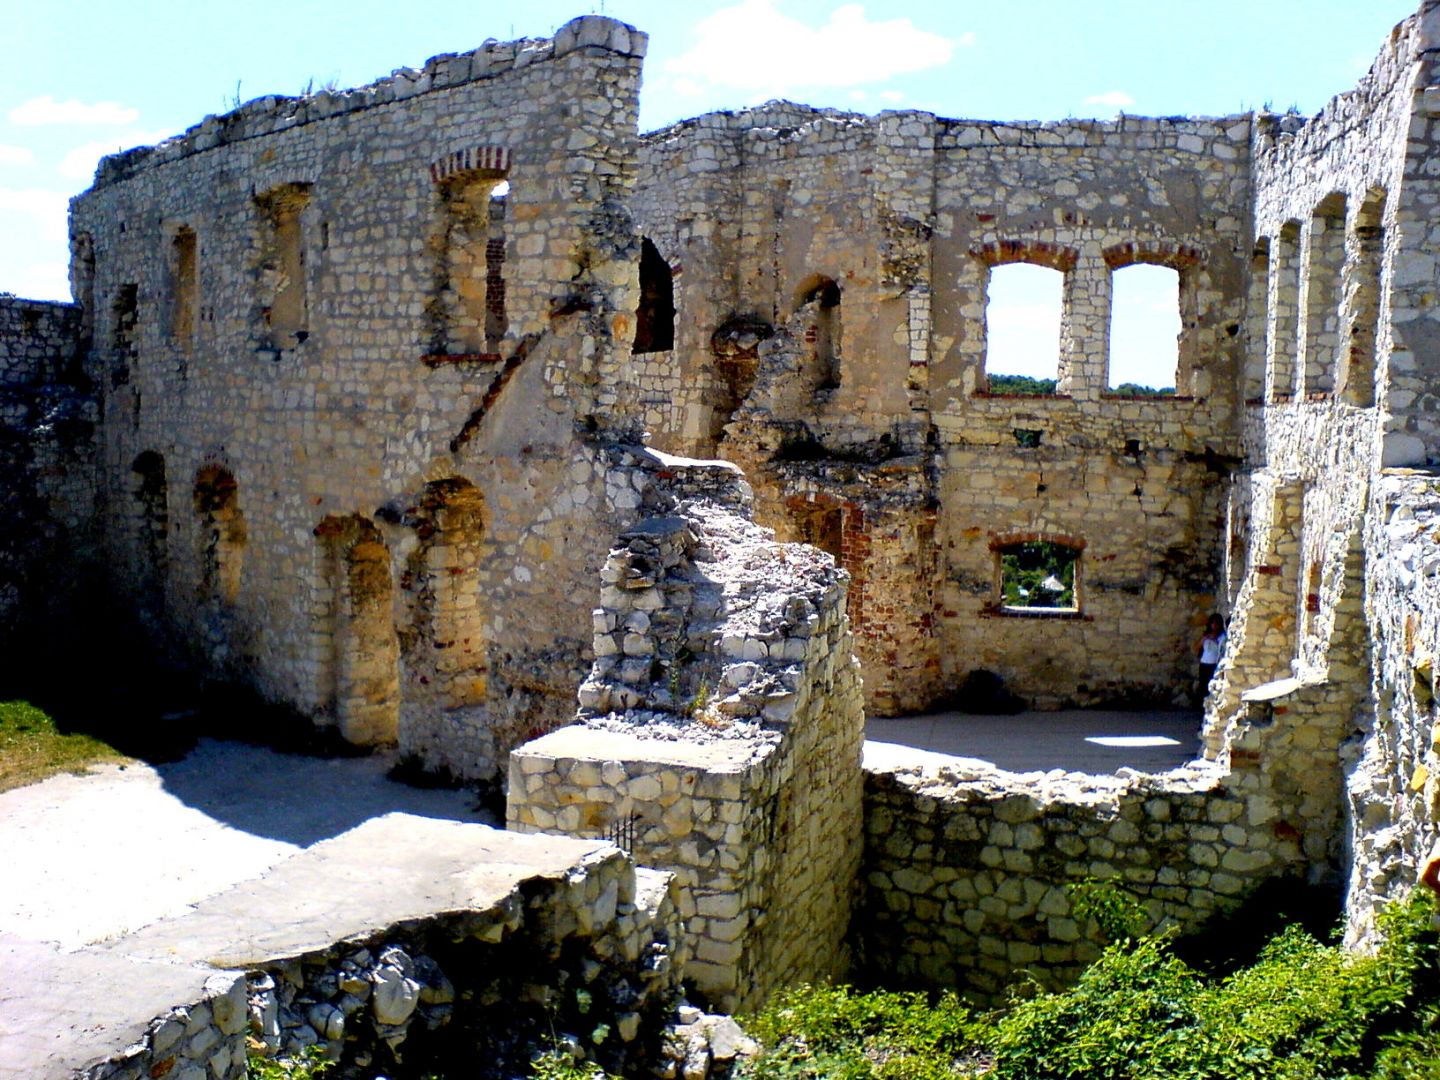 Ruins of the Royal Castle